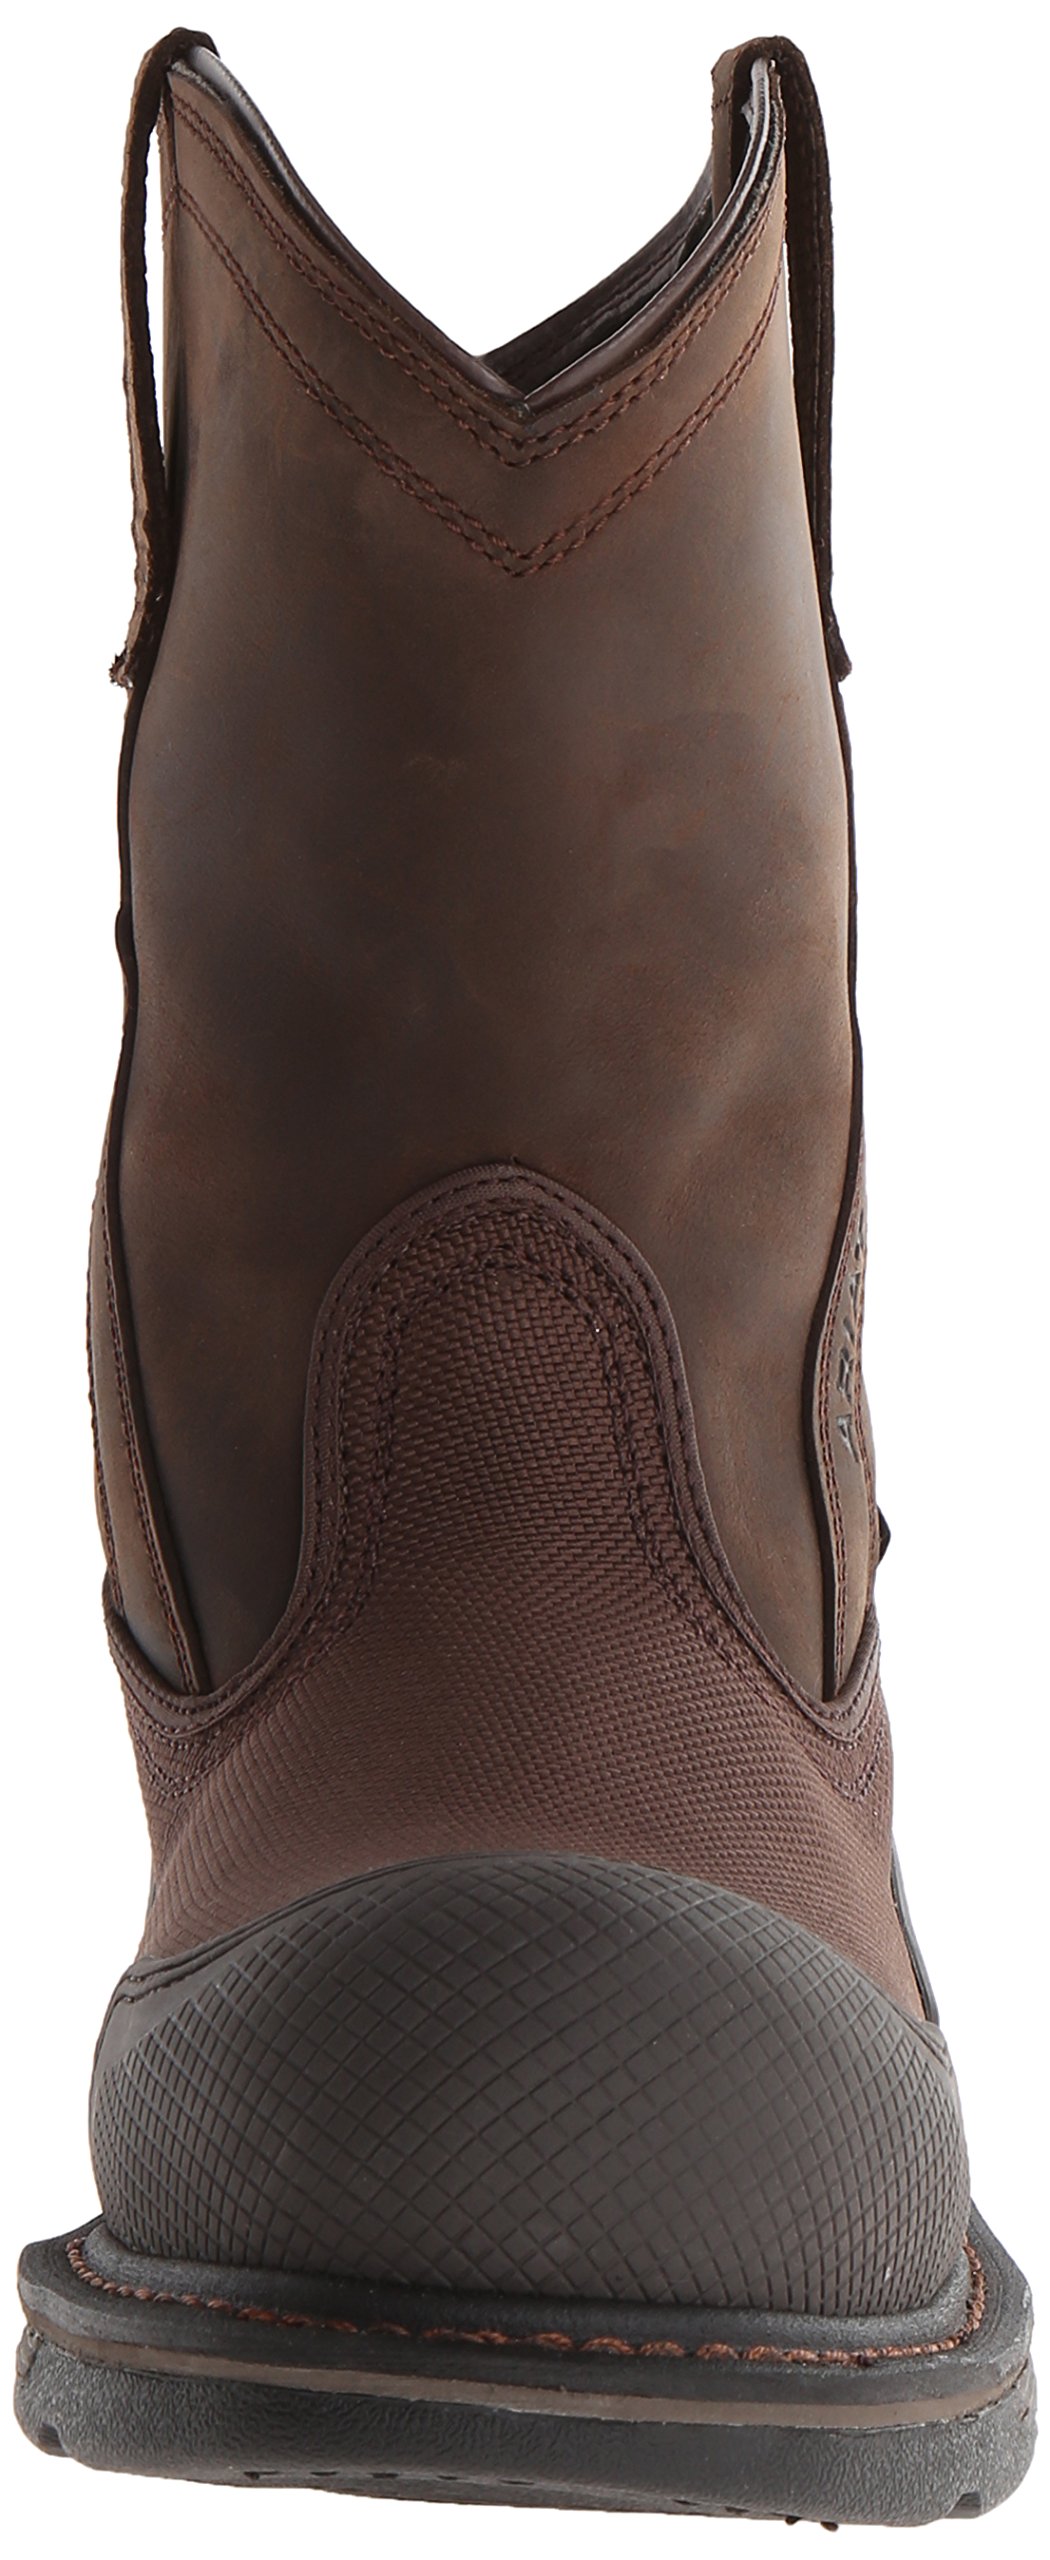 Ariat Men's Overdrive XTR Pull-on H2O Composite Toe Work Boot